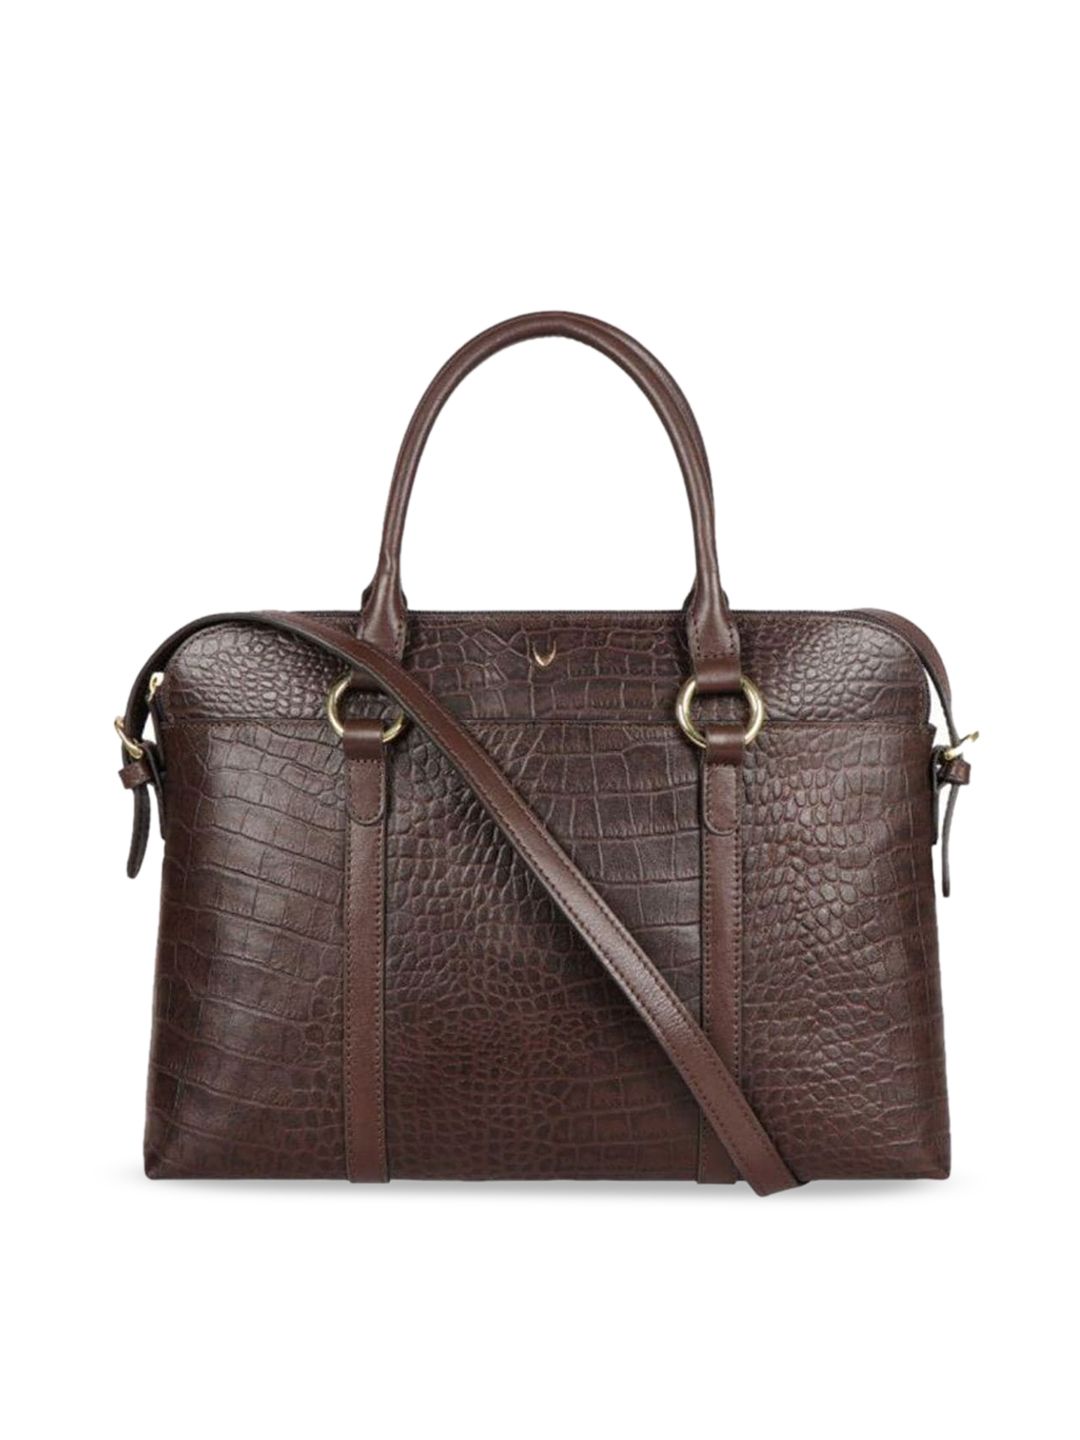 Hidesign Brown Textured Leather Oversized Structured Satchel Price in India